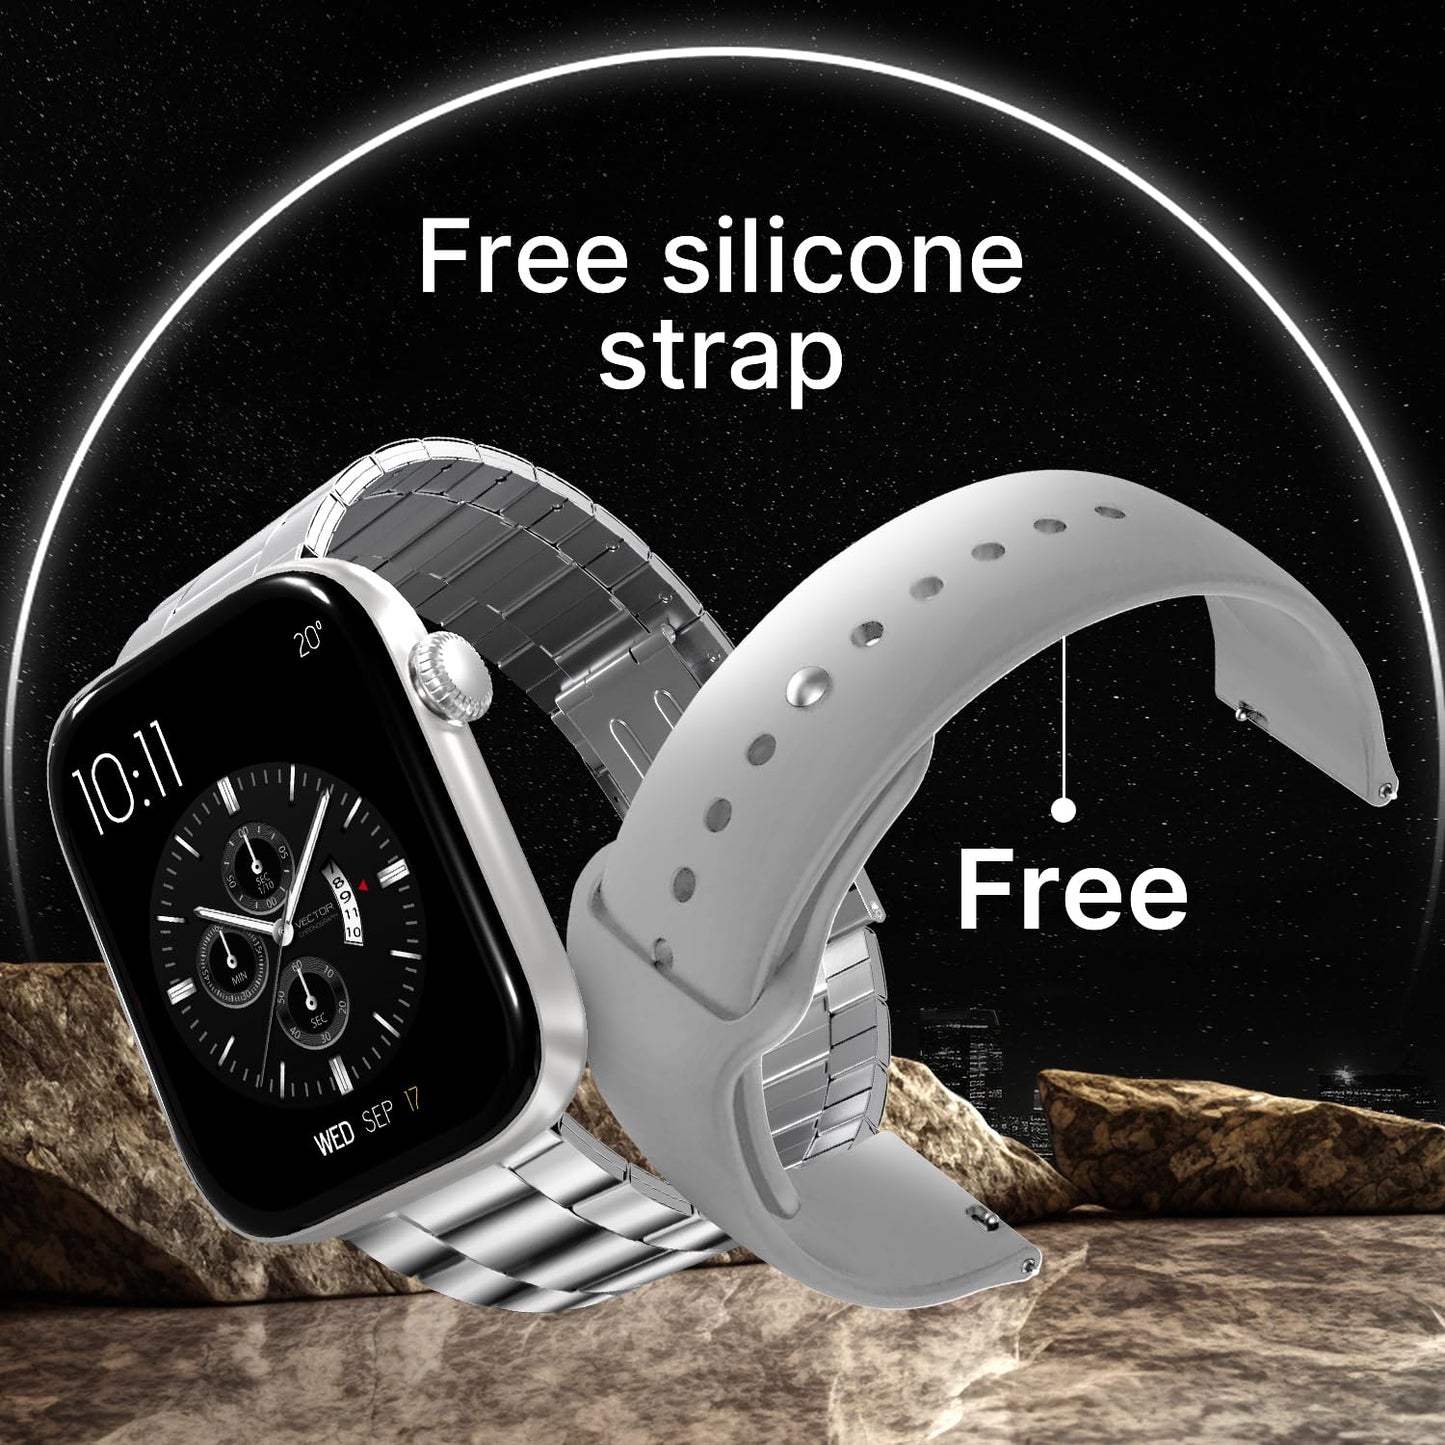 CrossBeats Stellr Newly launched Large 2.01"AMOLED Display 1000 NITS Bluetooth Calling Luxury High-Resolution Smart watch for Men Women |Health tracking| Fast Charge 7days Battery| Steel Strap|Silver